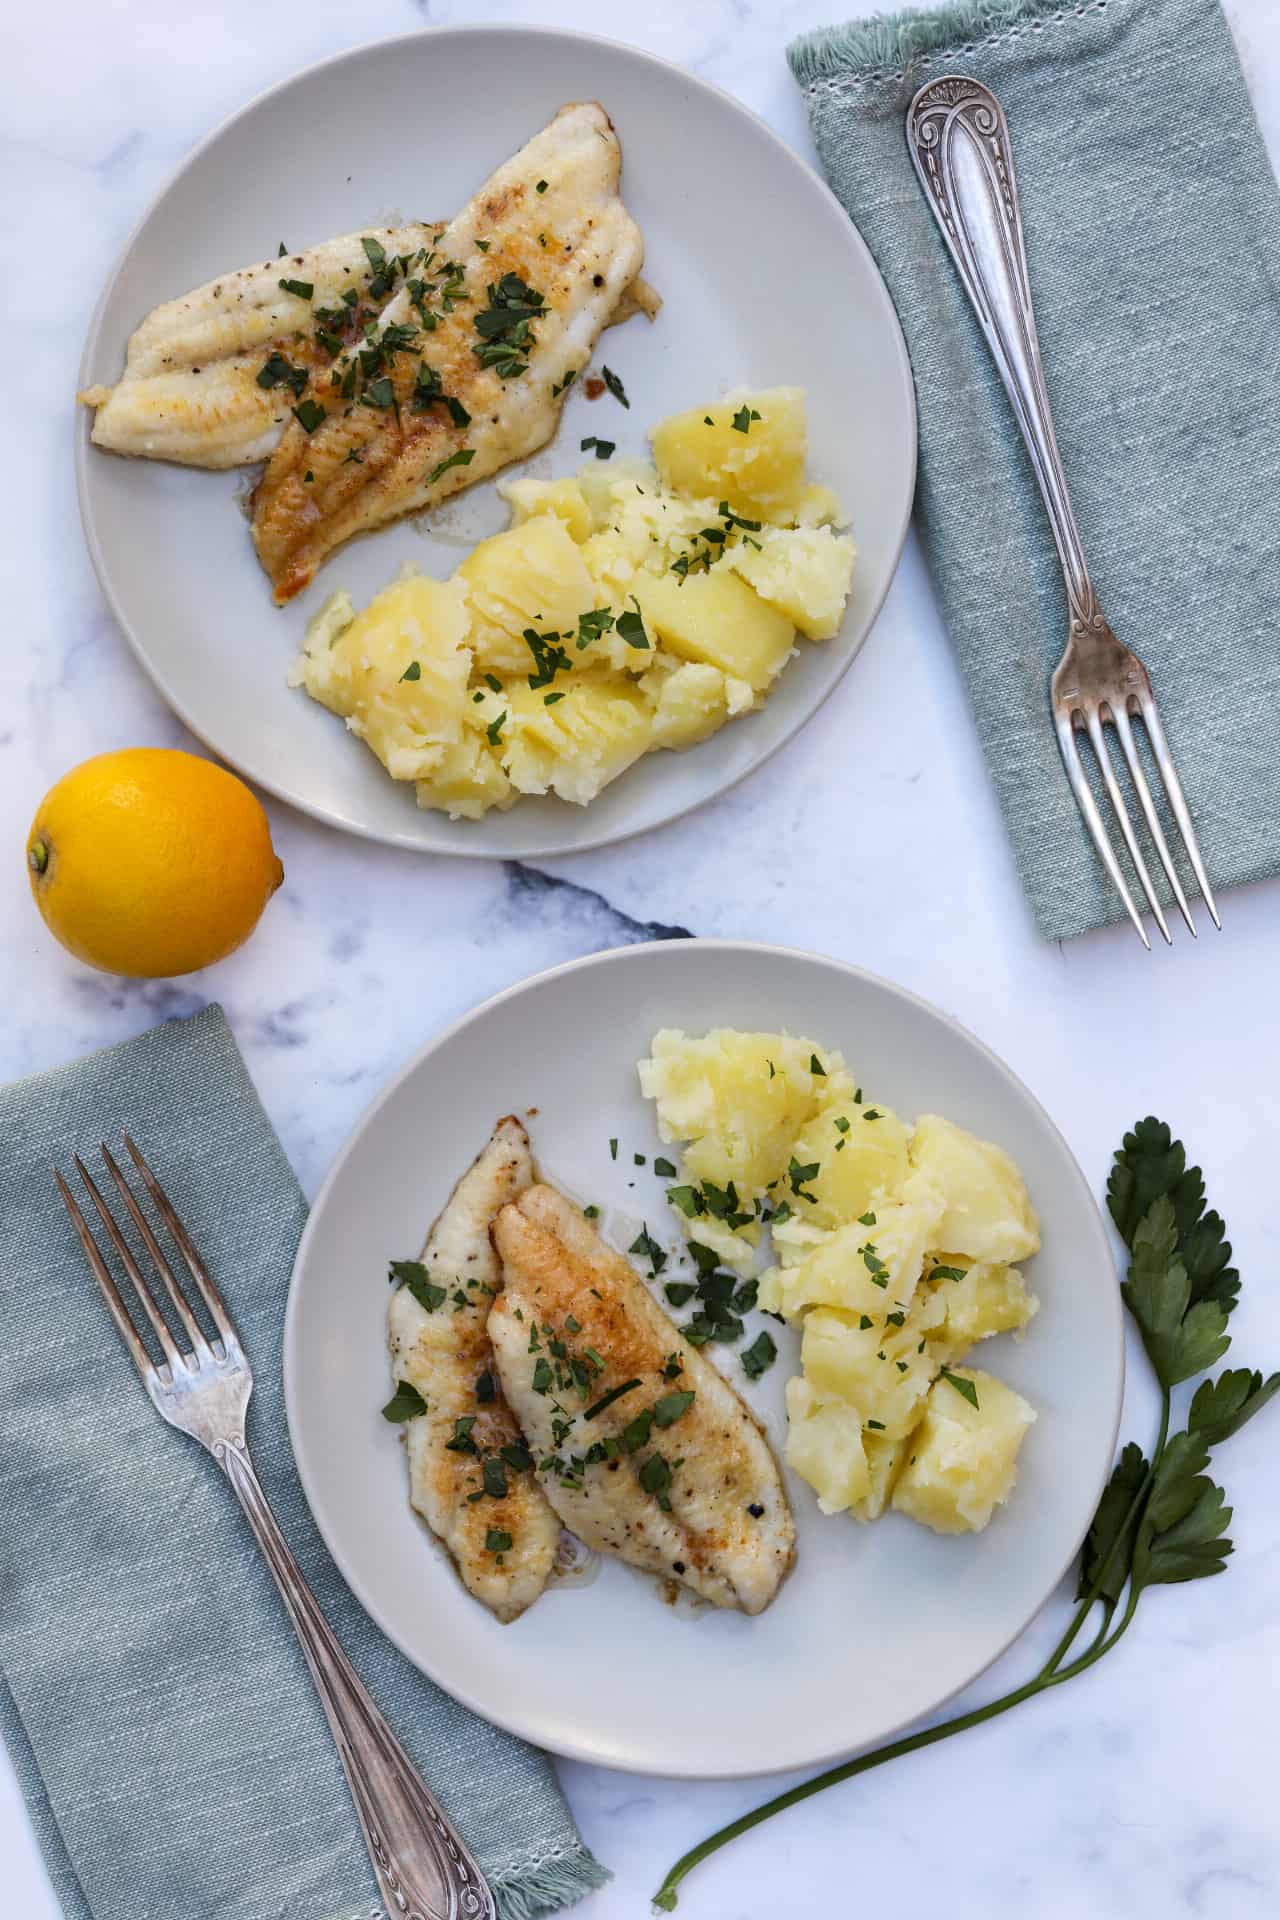 Sole meuniere on two plates with forks, napkins, parsley and lemon